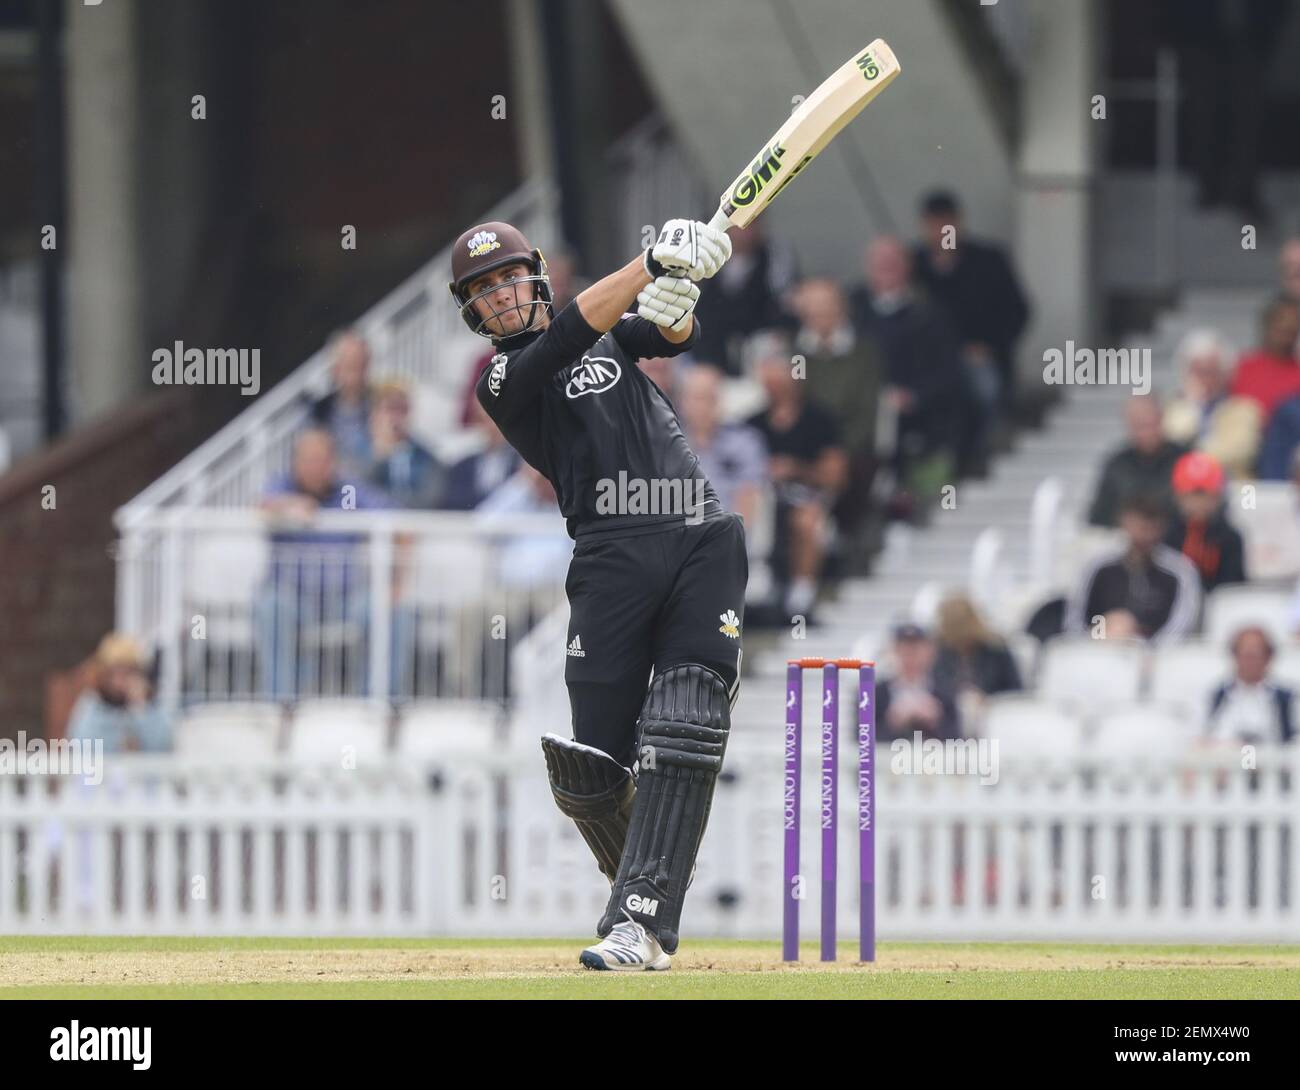 LONDON, UK. 23 April 2019: Will Jacks of of Surrey plays a shot and is caught out during the Surrey v Essex, Royal London One Day Cup match at The Kia Oval. (Photo by Mitchell Gunn/ESPA/Cal Sport Media/Sipa USA) Stock Photo